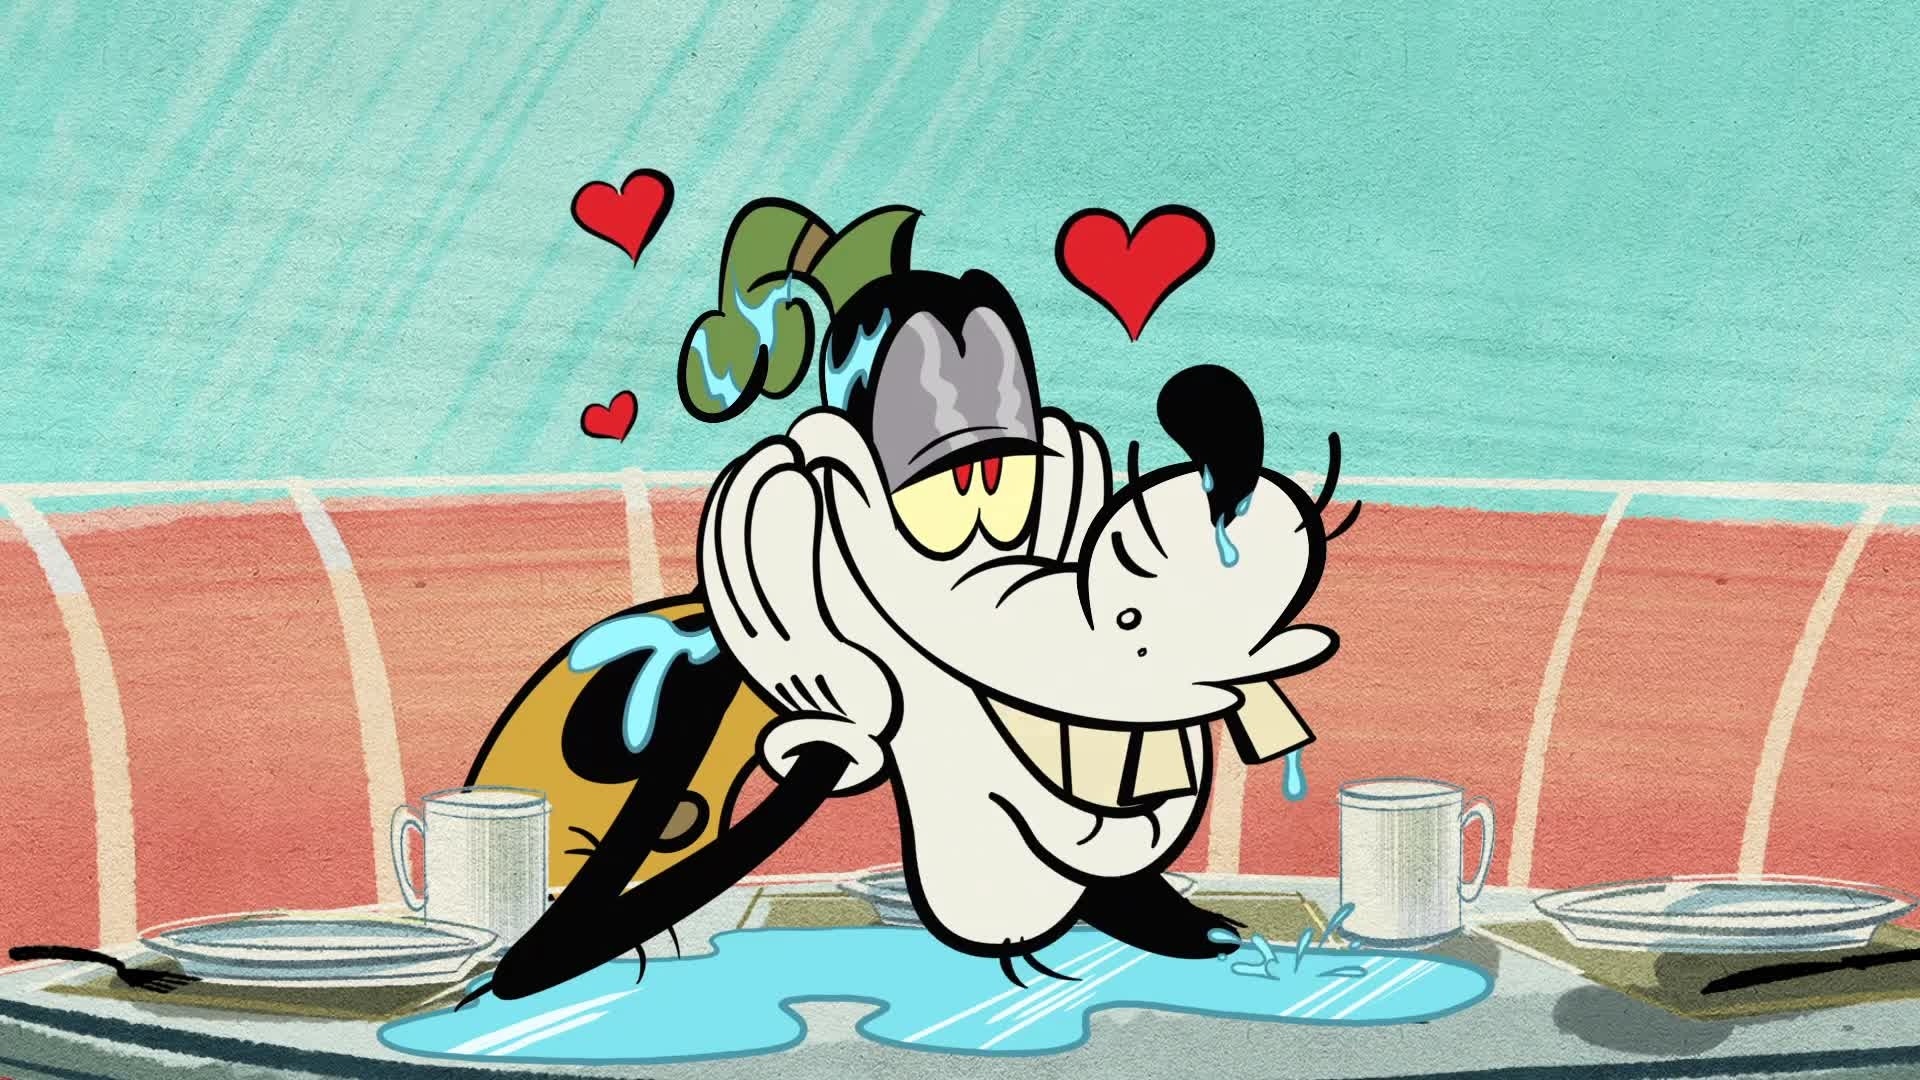 Goofy In Love Emotion Of Love Art Images 1920x1080 : Wallpapers13.com